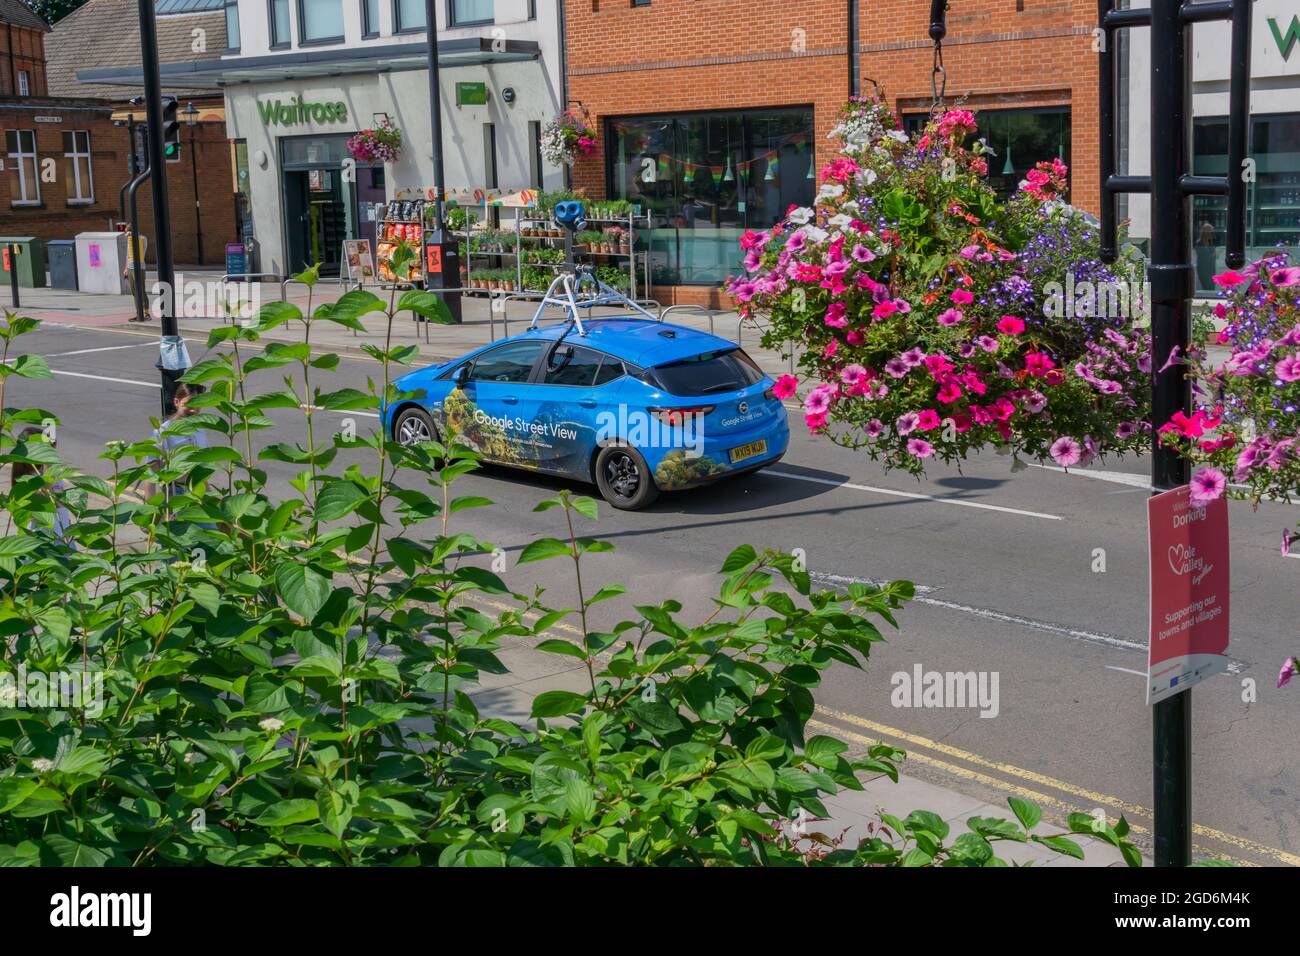 Dorking, Surrey, UK, 11-08-2021: A Blue Google Street View Car with a Roof Top Camera, Passing a Local Waitrose Supermarket on a Dry Summers Day with Stock Photo